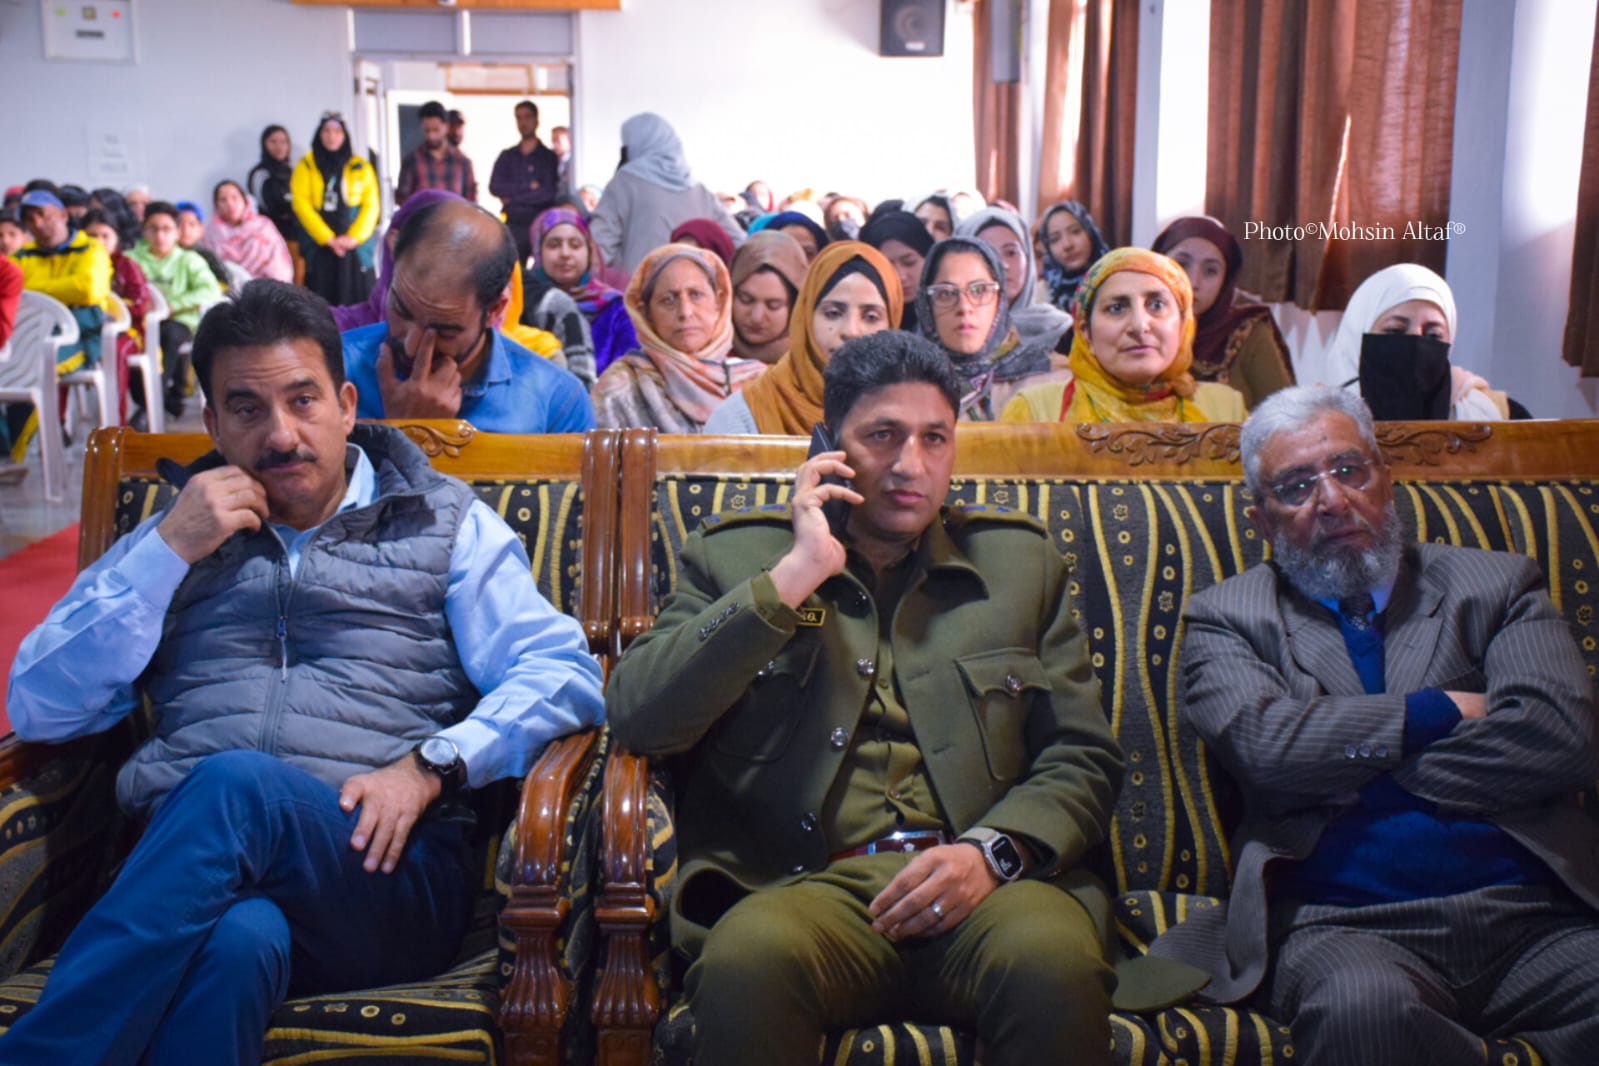 Srinagar Police organises drug de-addiction awareness programme at  Green valley Educational institute  Illahi bagh  The aim of the programme was to raise awareness about drug menace and drug de-addiction measures :SP Hazratbal   Cash prizes,  momentoes , Appreciation certificates given to the students 